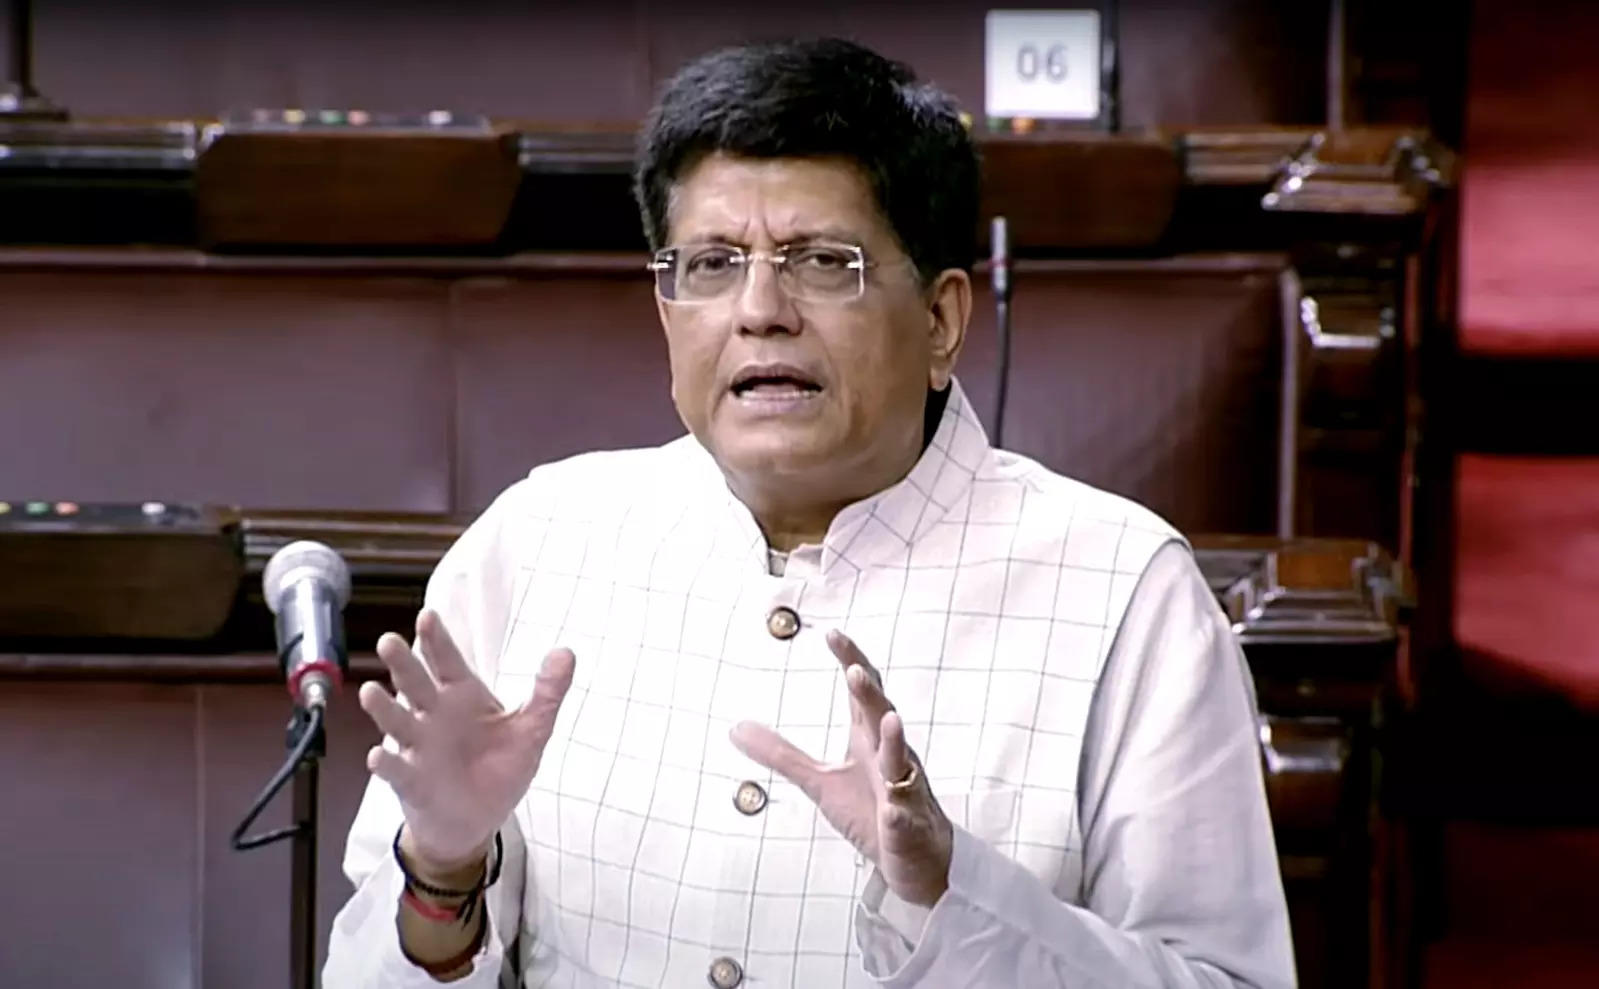  Union Minister of Commerce and Industry Piyush Goyal